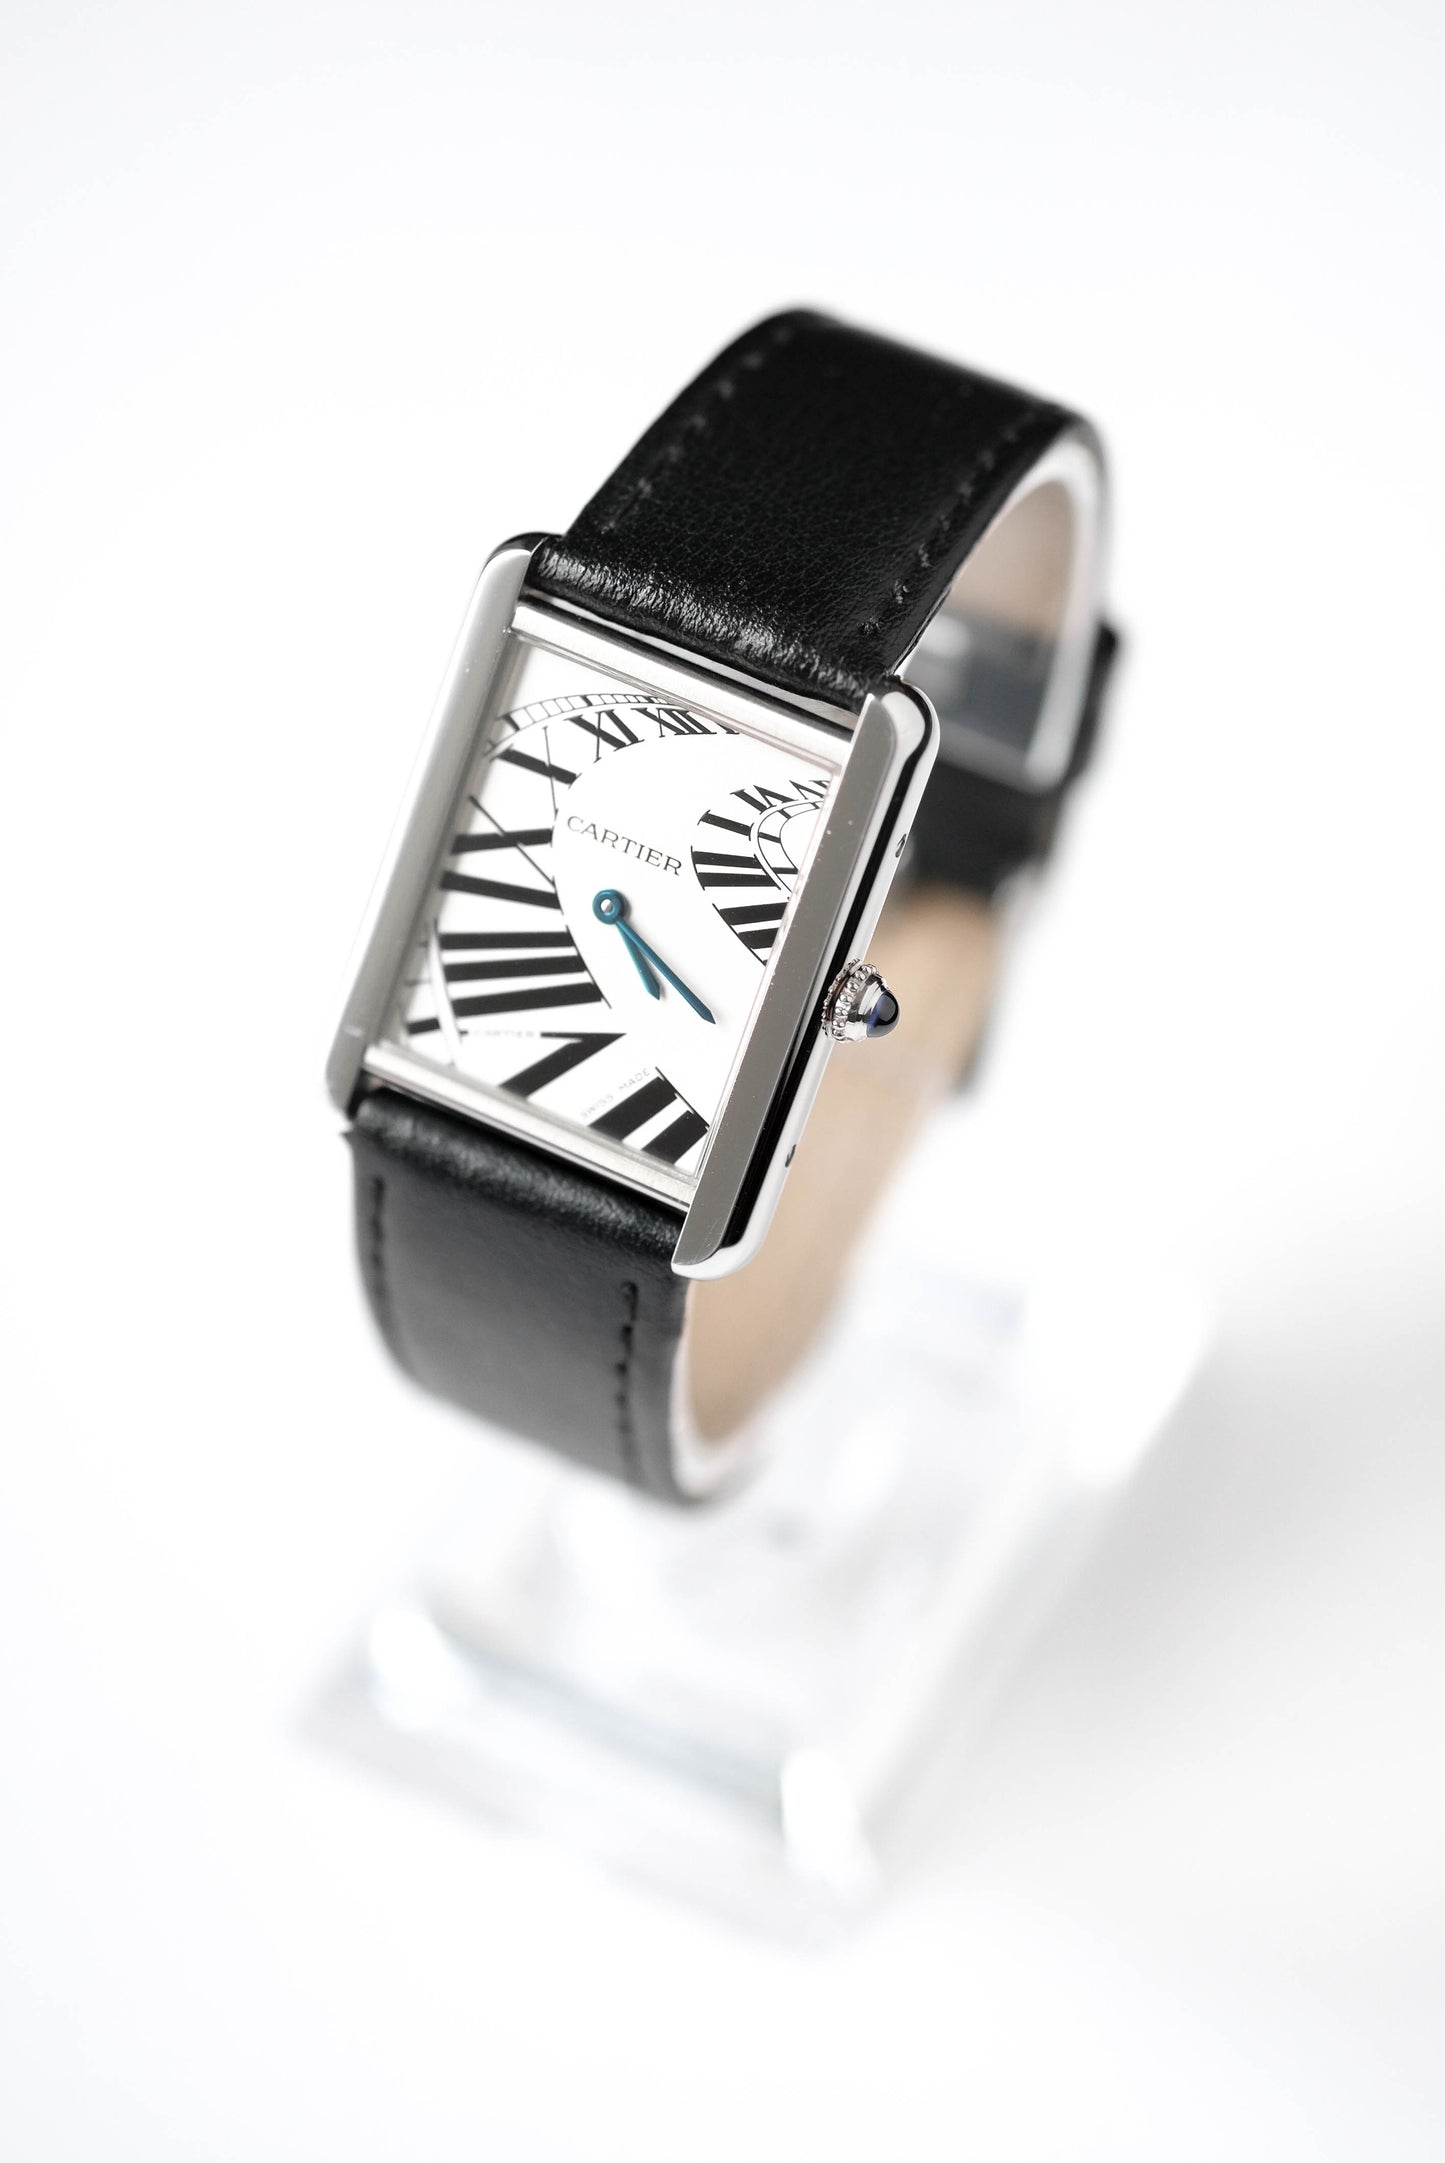 Cartier Tank Solo "Piano" Large